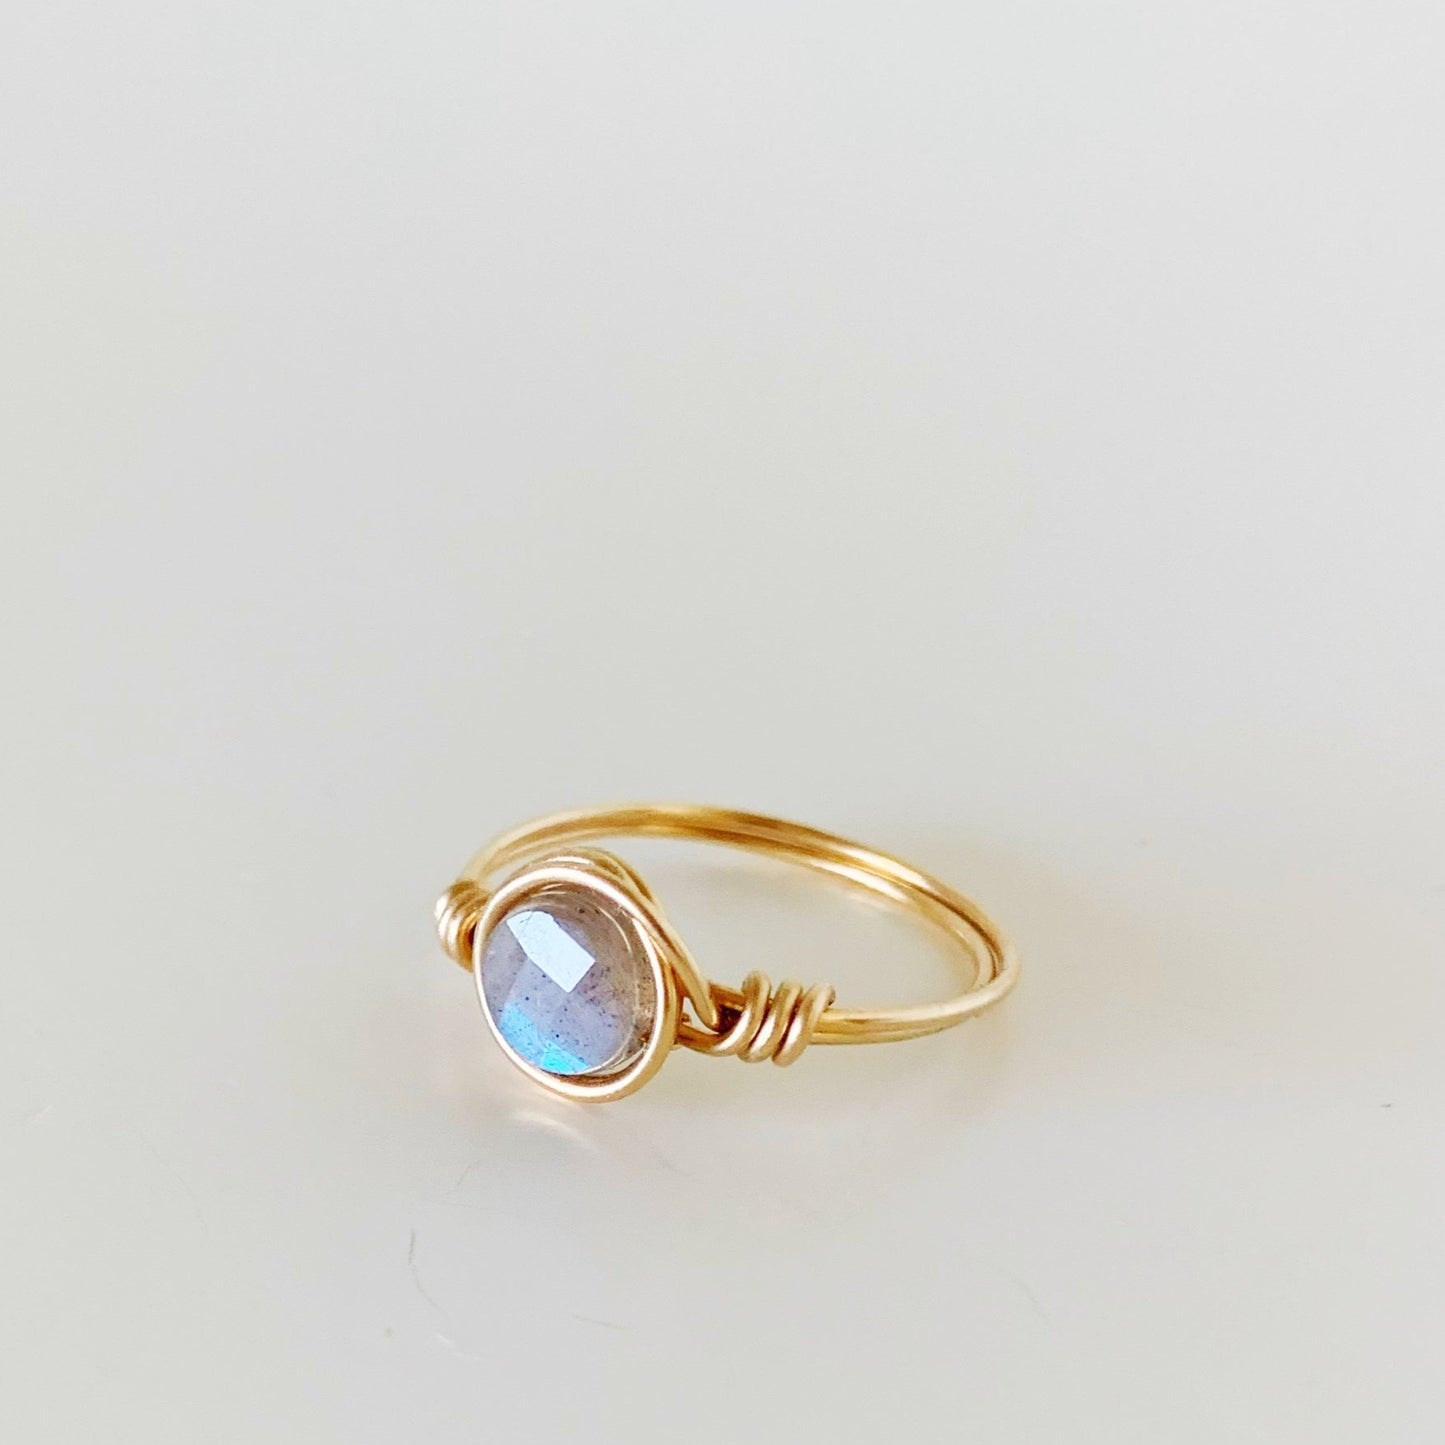 the mermaids and madeleines arctic ring is a wire wrapped ring made with 14k gold filled wire and a faceted labradorite coin bead at the center. this ring is facing to the left to show a side view and is photographed on a white background